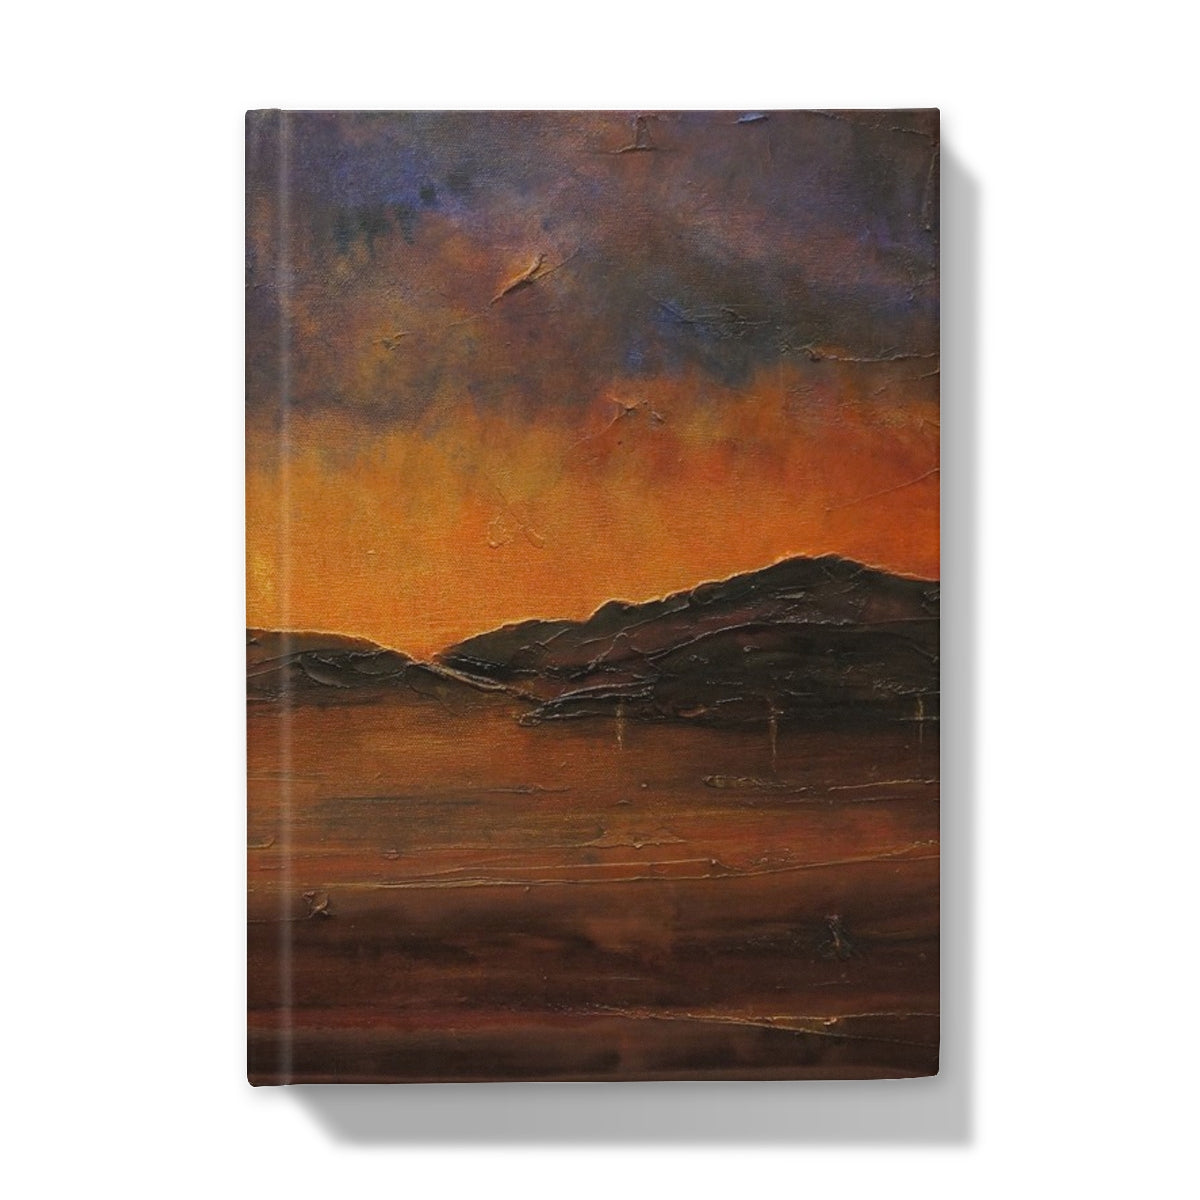 A Brooding Clyde Dusk Art Gifts Hardback Journal-Journals & Notebooks-River Clyde Art Gallery-5"x7"-Plain-Paintings, Prints, Homeware, Art Gifts From Scotland By Scottish Artist Kevin Hunter